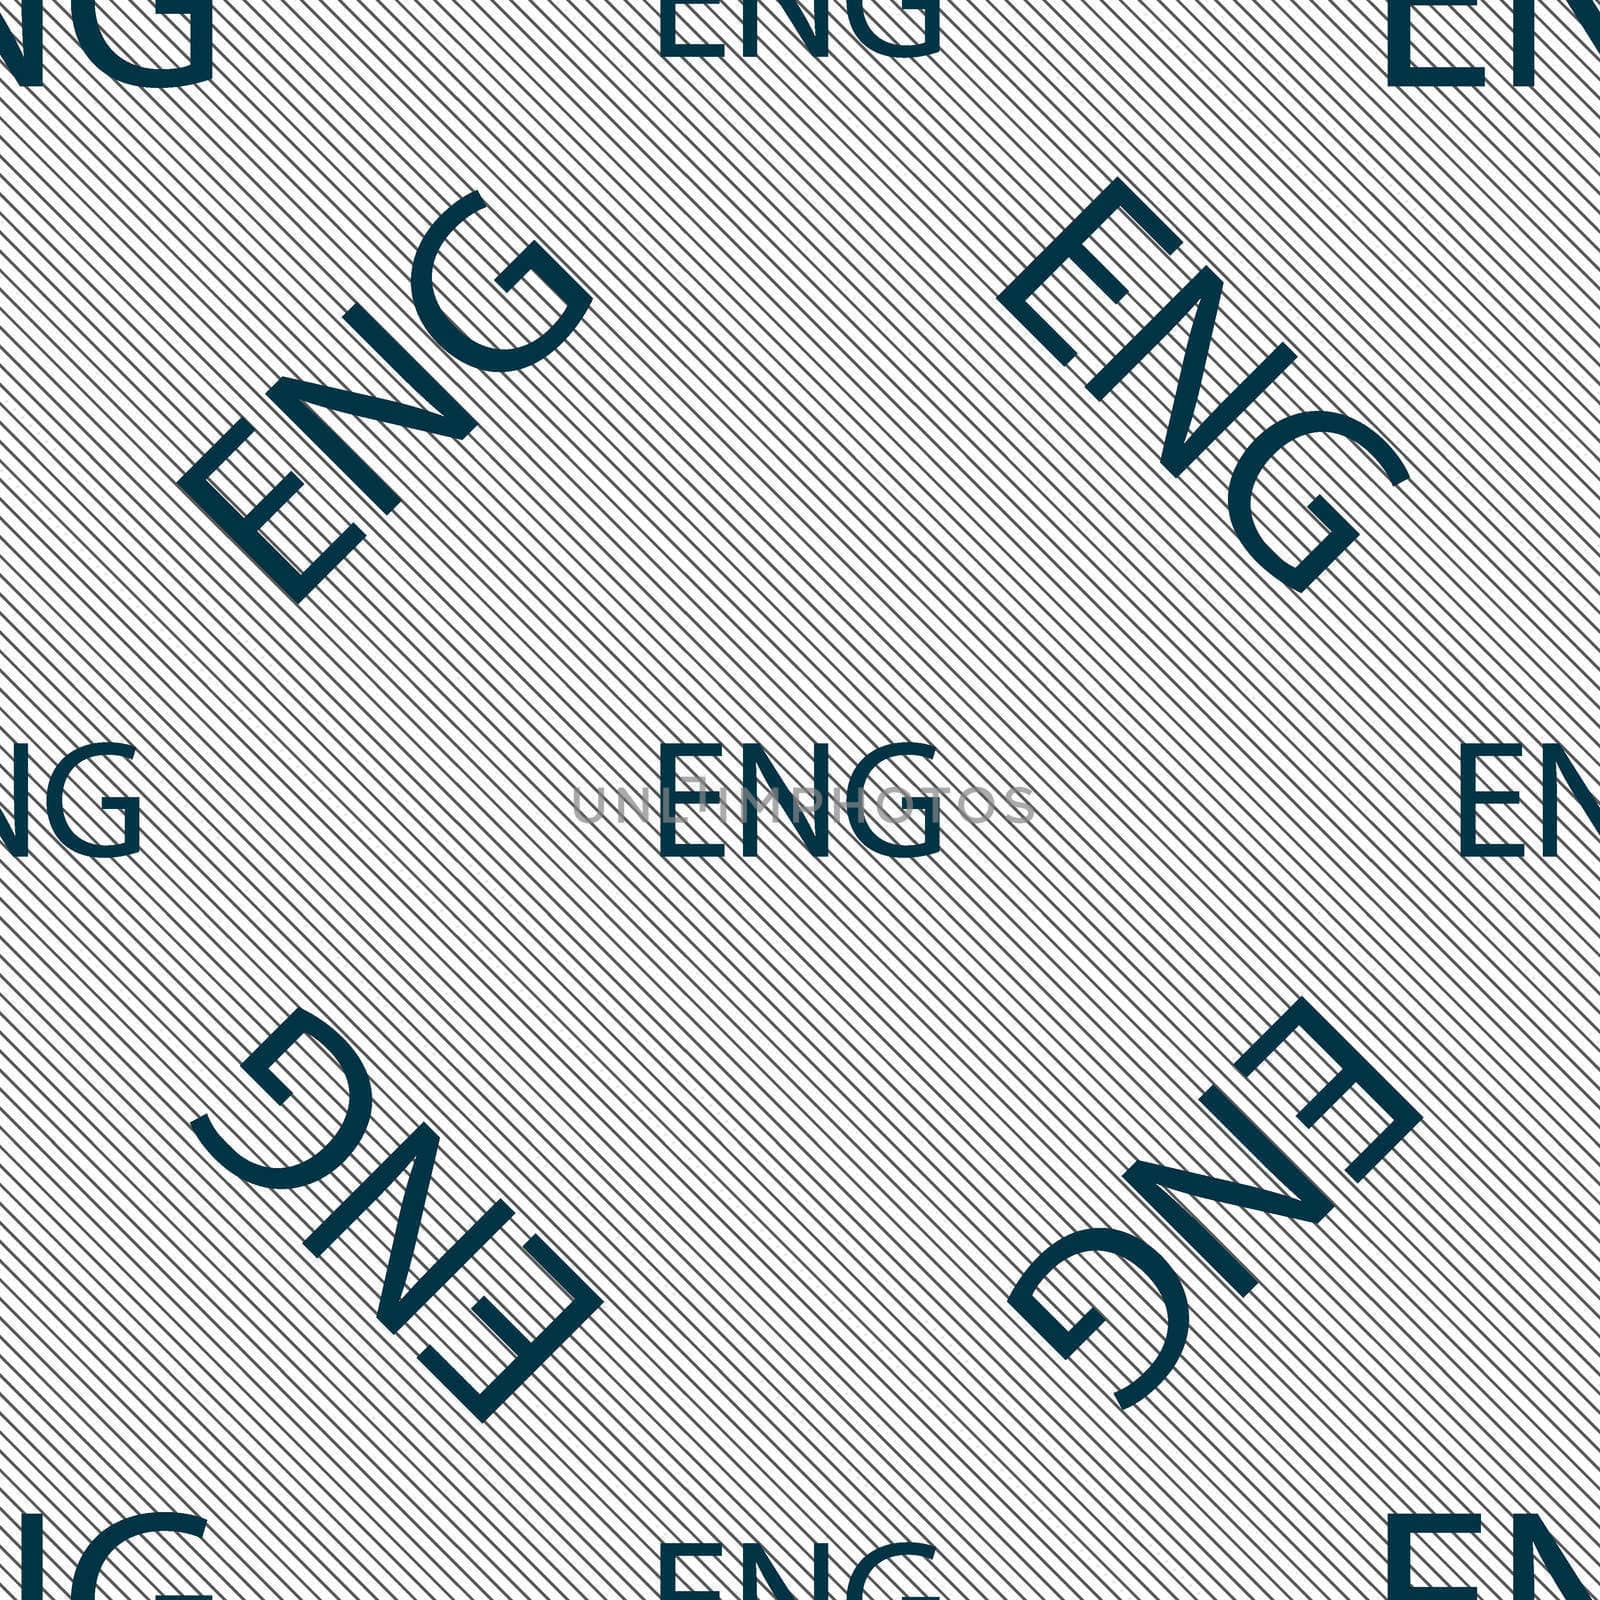 English sign icon. Great Britain symbol. Seamless pattern with geometric texture.  by serhii_lohvyniuk